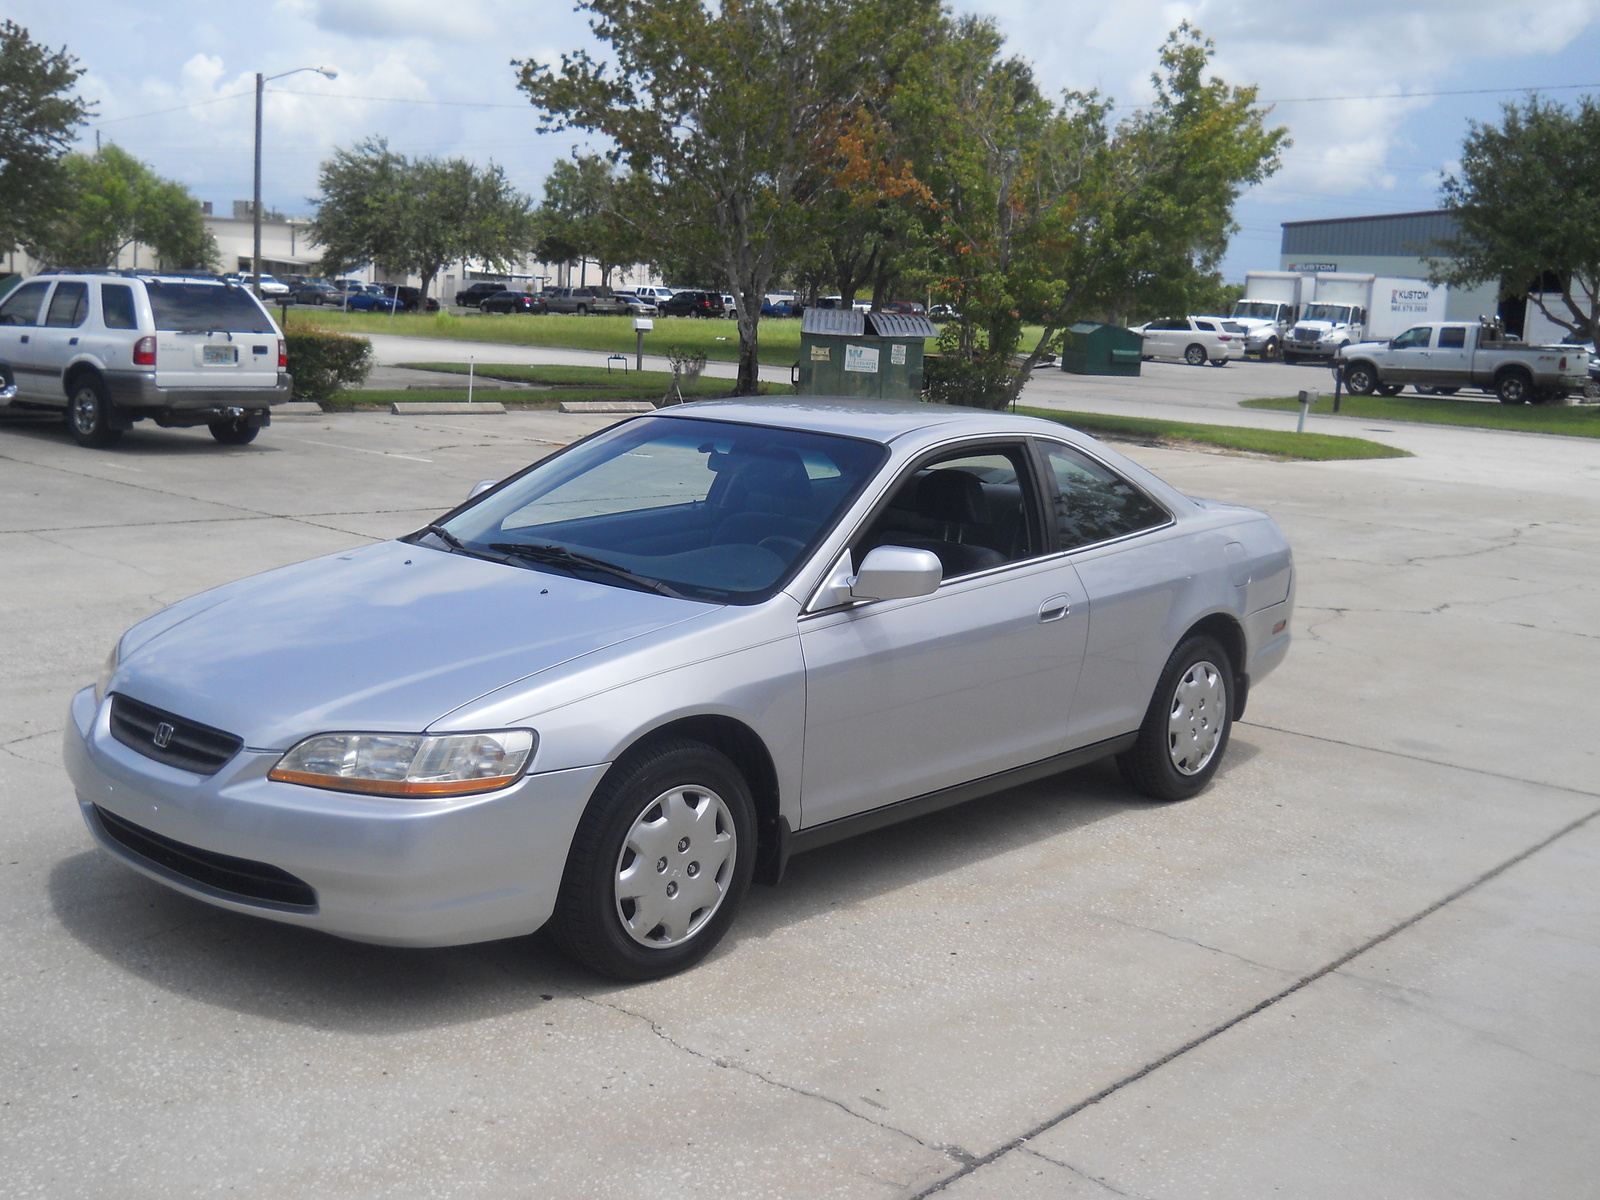 2000 Honda accord picture gallery #1